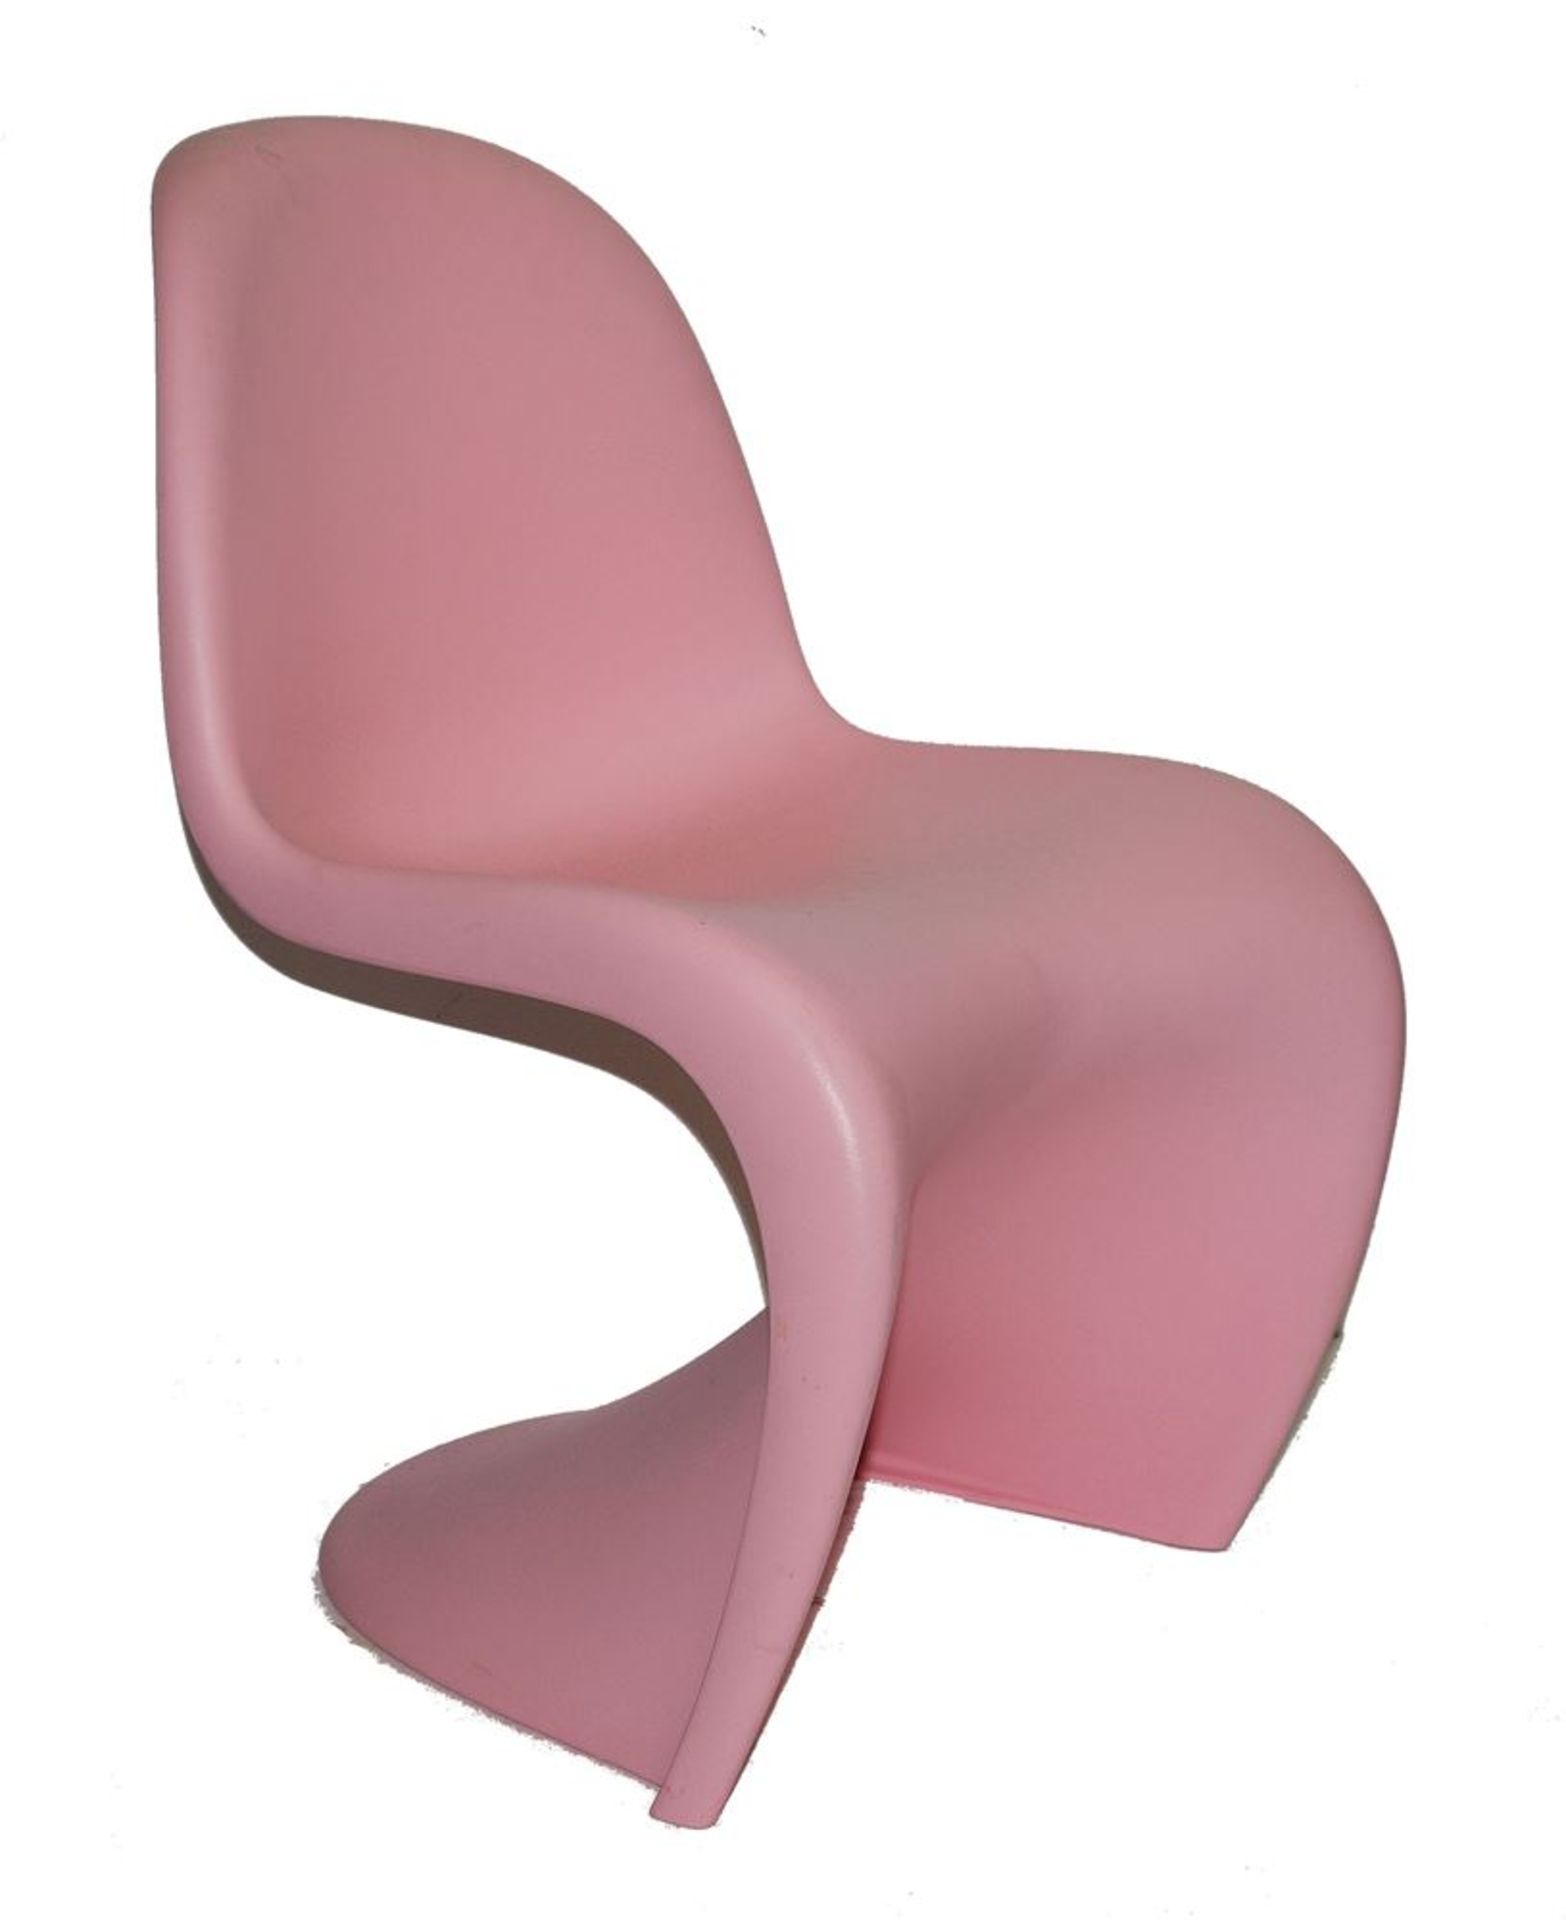 Panton Junior, cantilever children's chair by Vitra